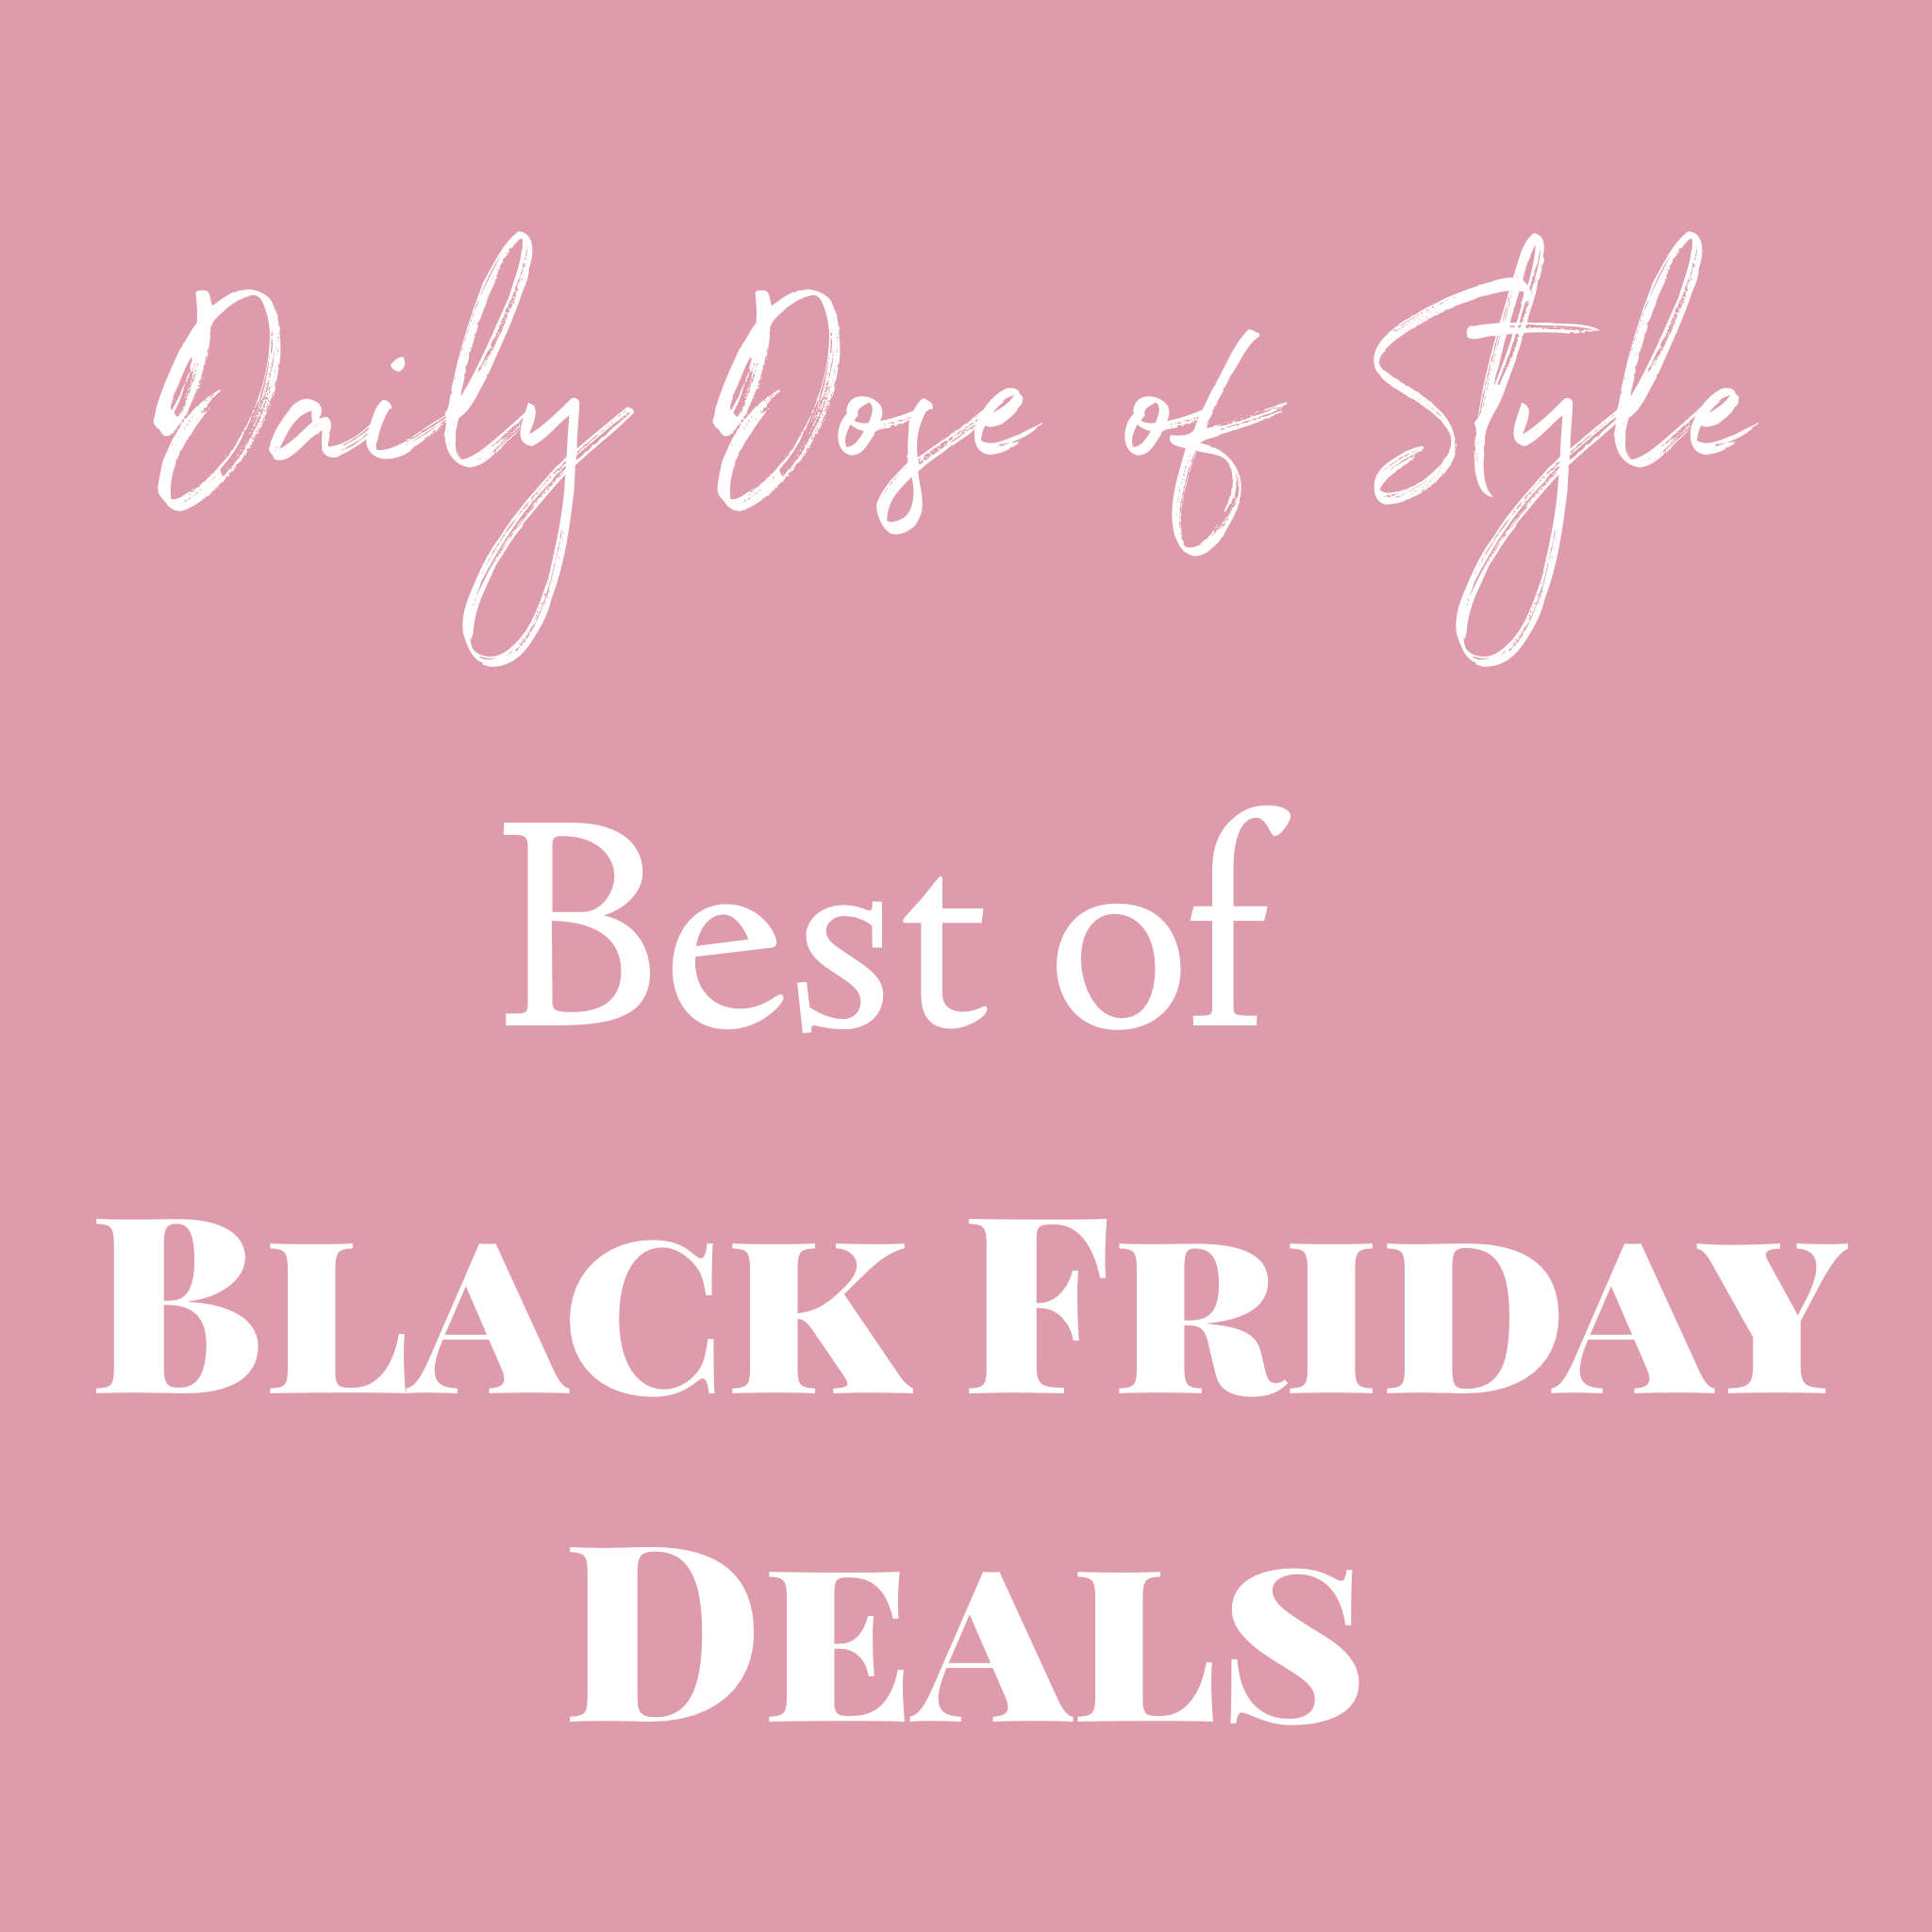 Nordstrom Rack Tory Burch Sale Up to 50% Off